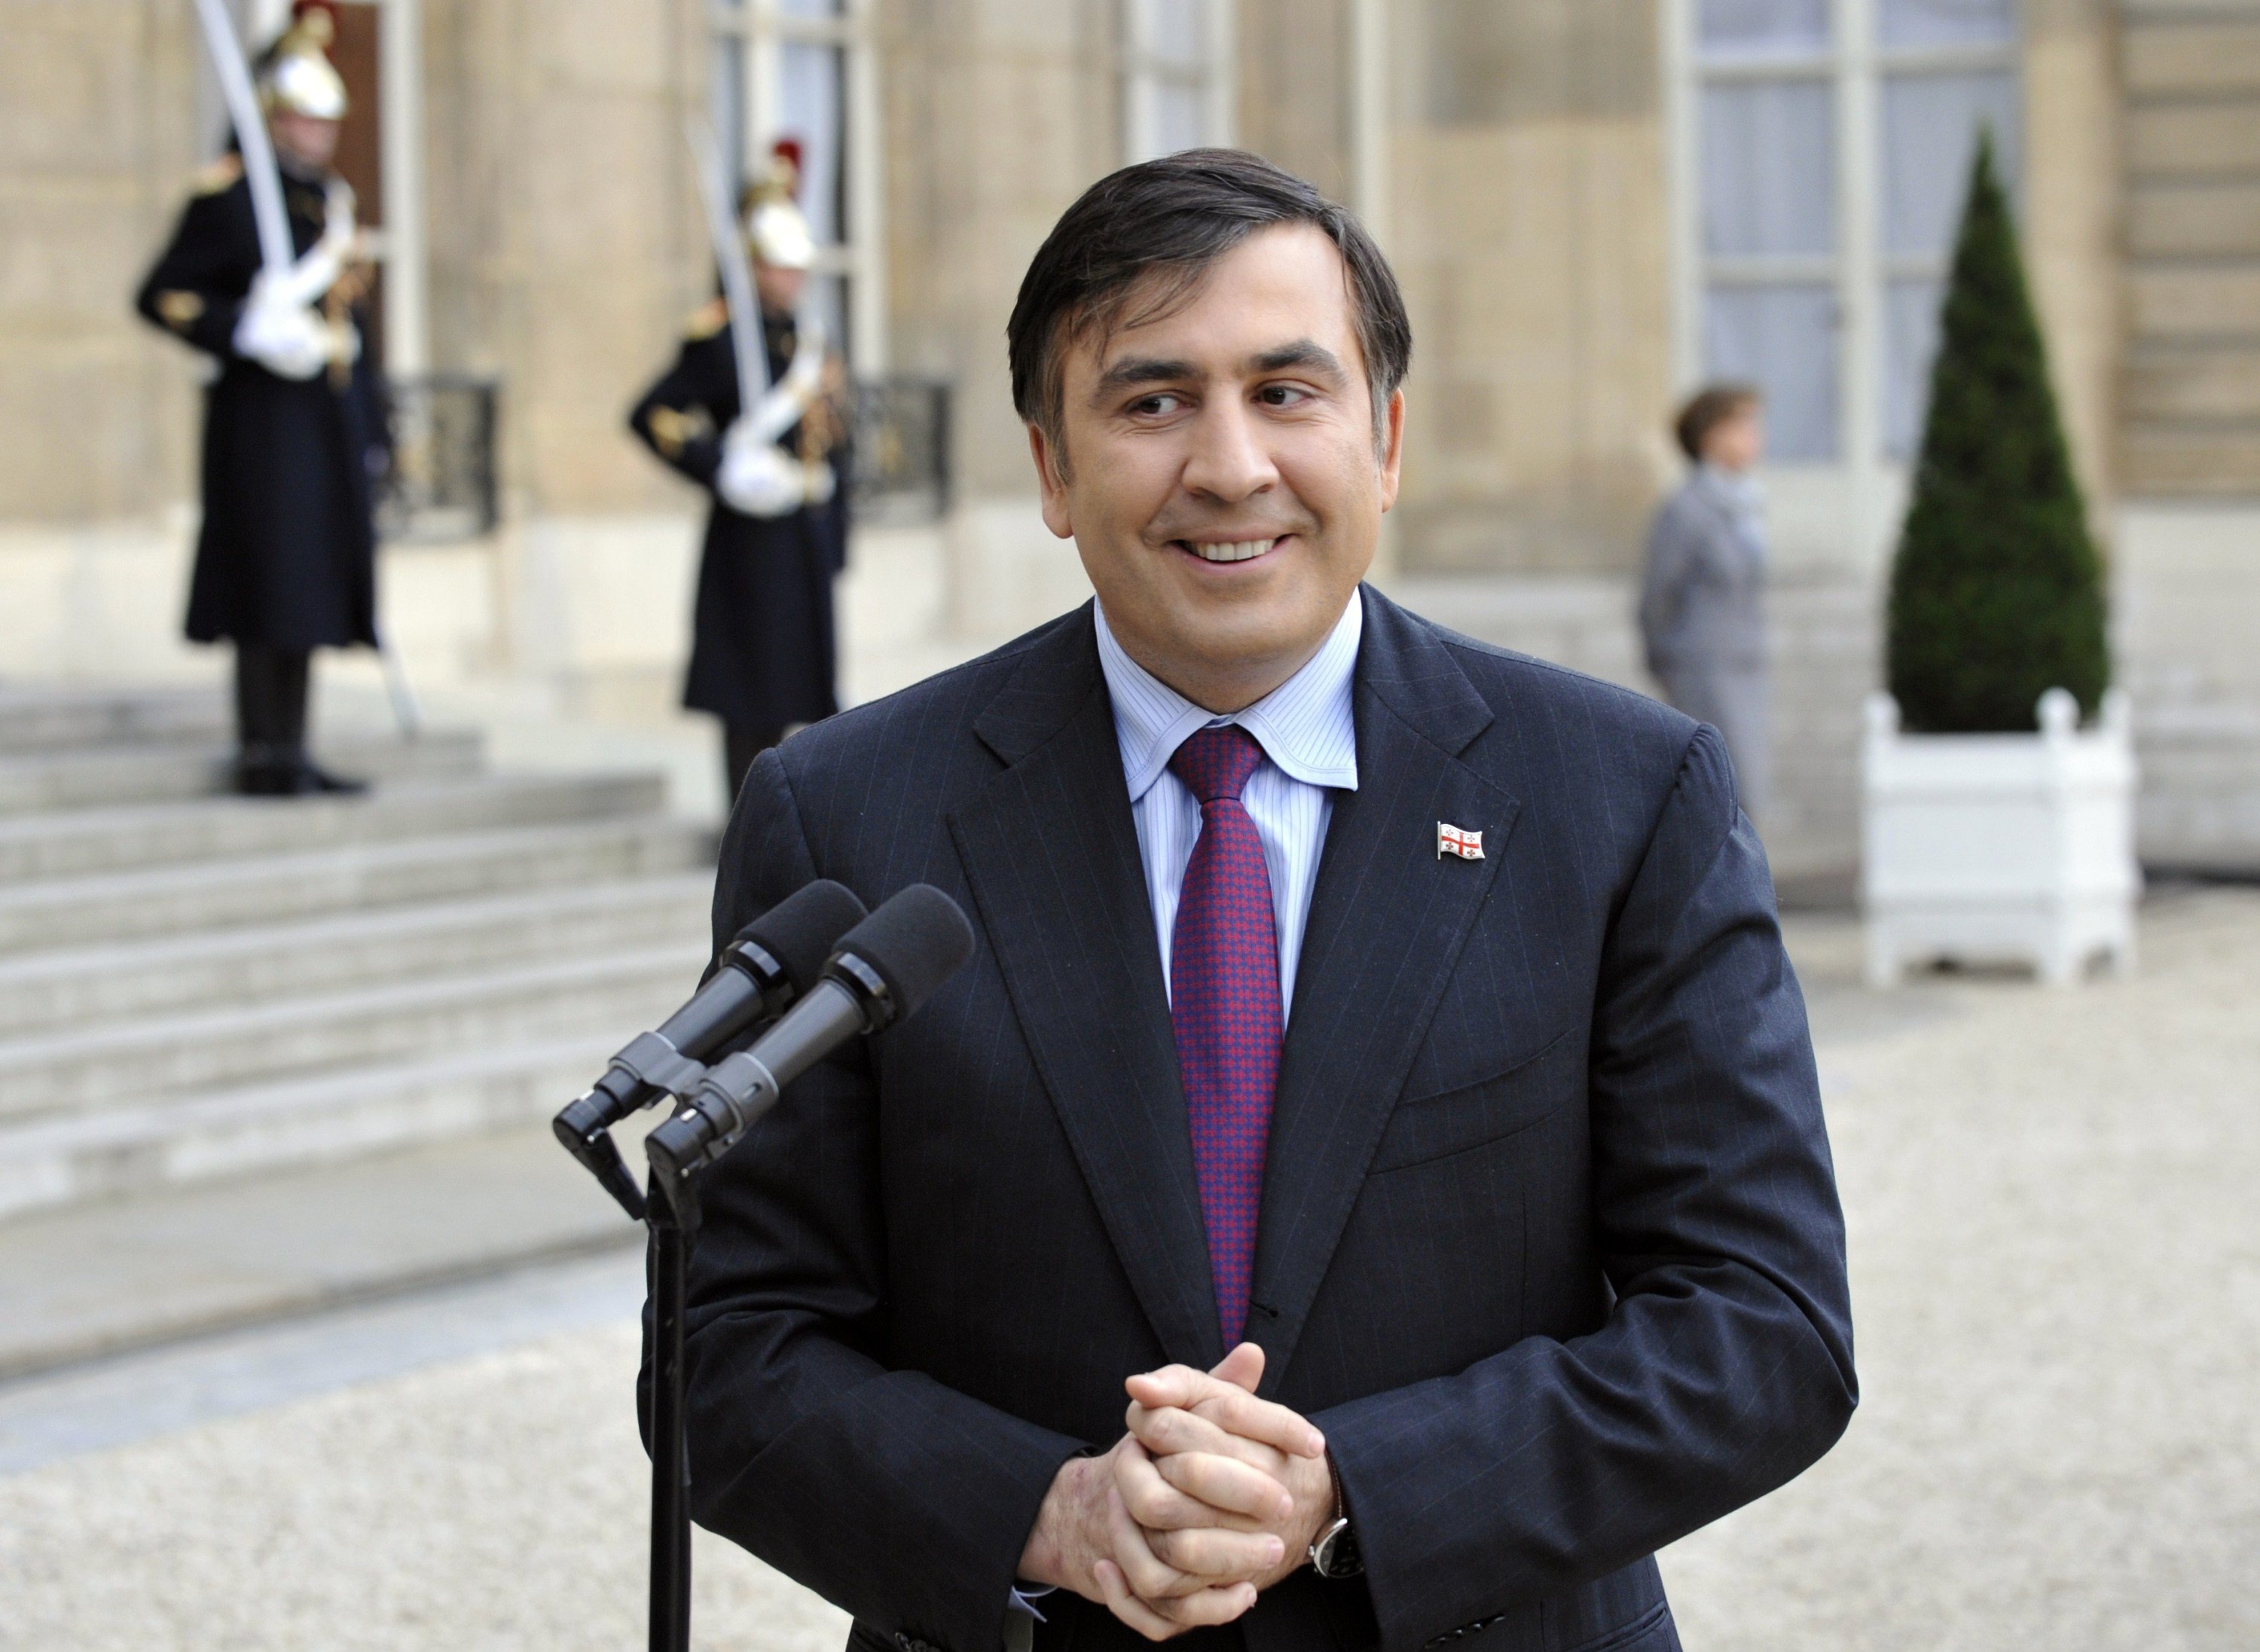 Former Georgian President Mikheil Saakashvili has been in prison since October 1 on charges of alleged fraud, and ahs reportedly been tortured.